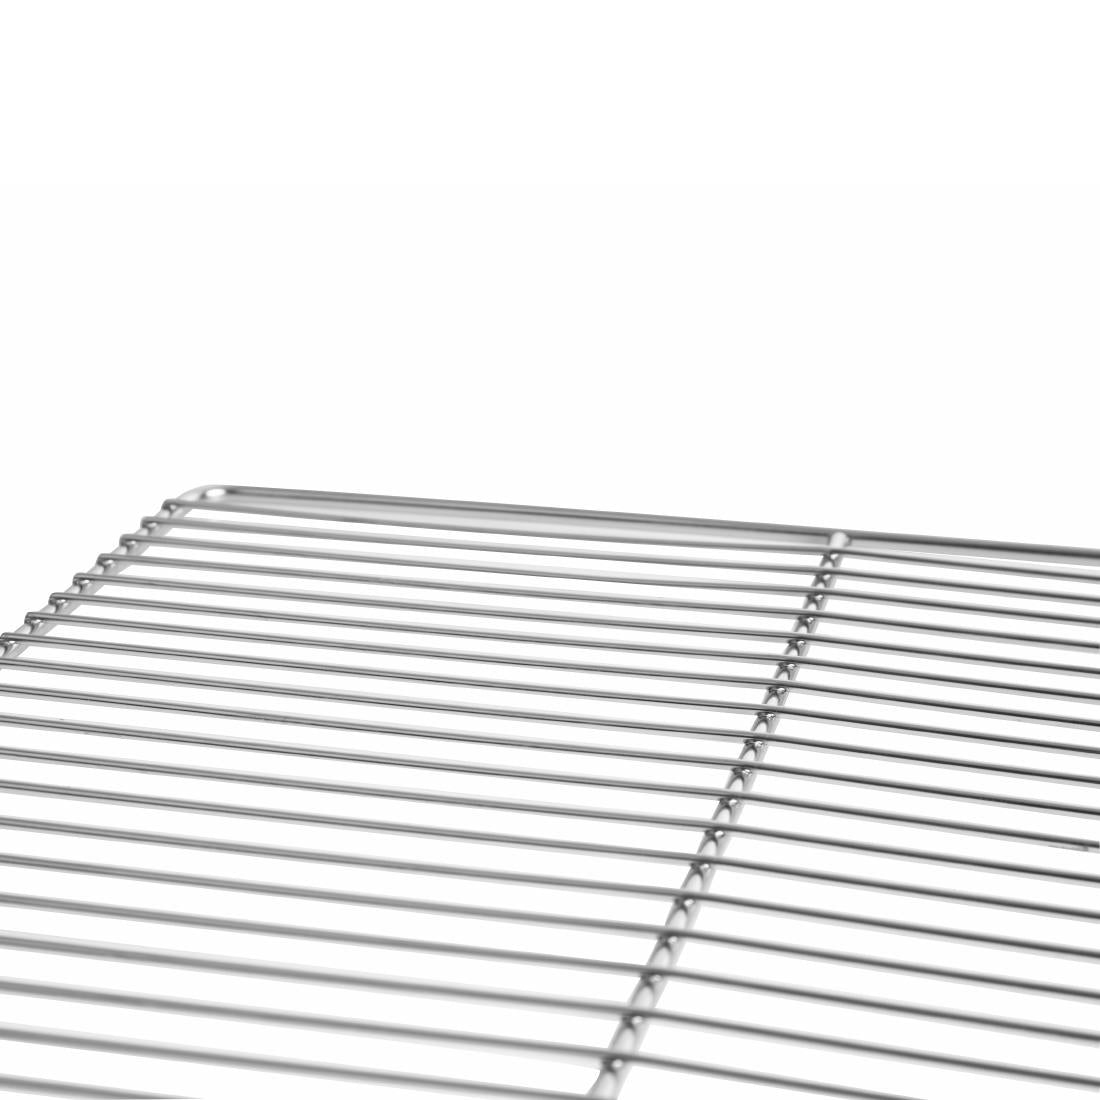 CX526 Matfer Bourgeat Stainless Steel Grate 400X300mm JD Catering Equipment Solutions Ltd